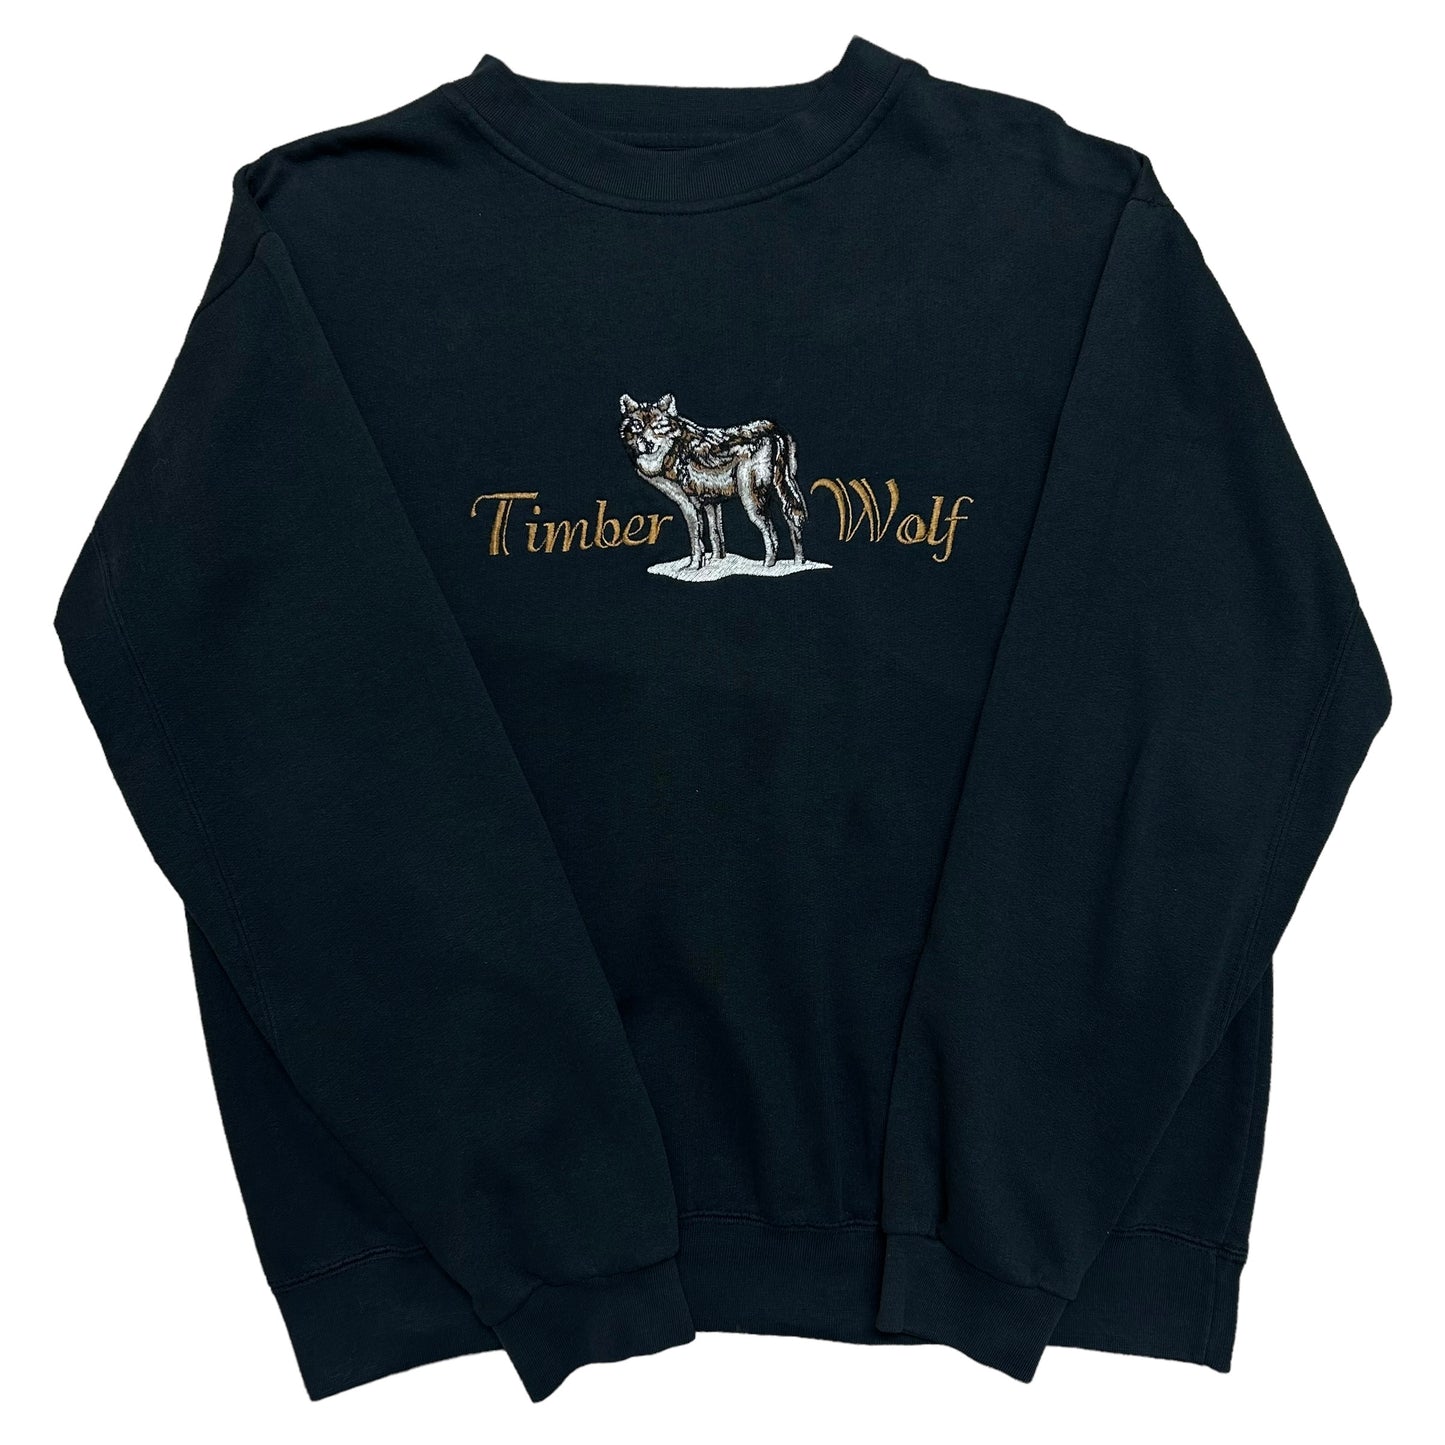 Late 2000s Coldwater Creek Timer Wolf Embroidered Black Crewneck Sweatshirt - Size Large (Boxy Fit)